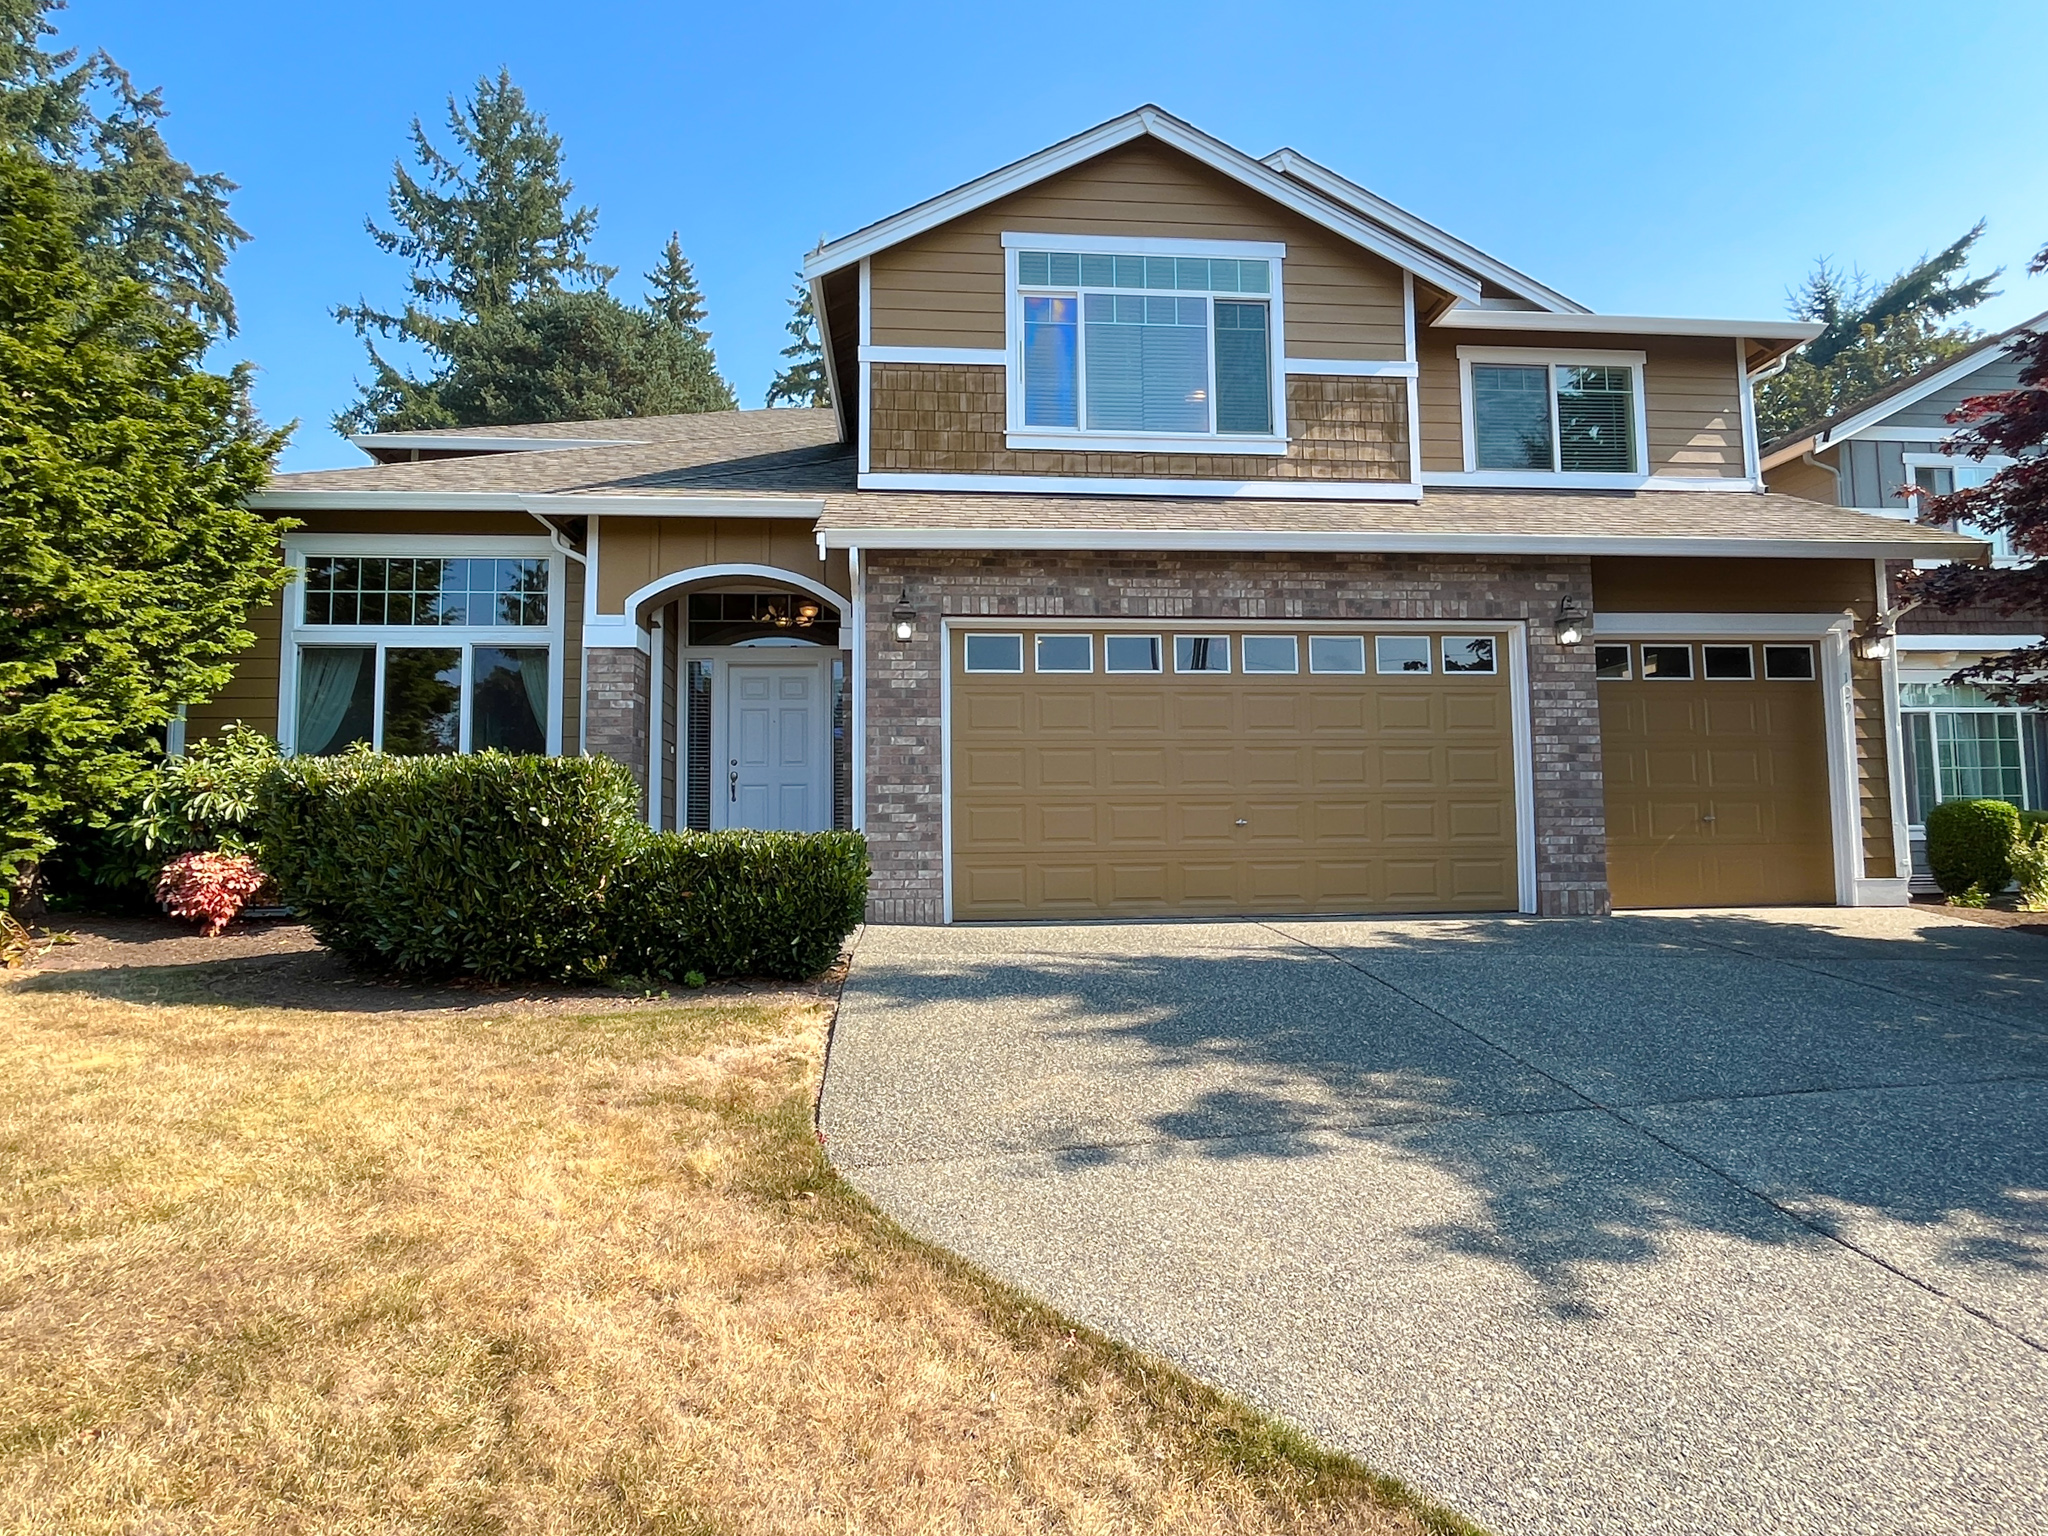 129 185th Pl SW Bothell, WA 98012 $3,500 Per Month